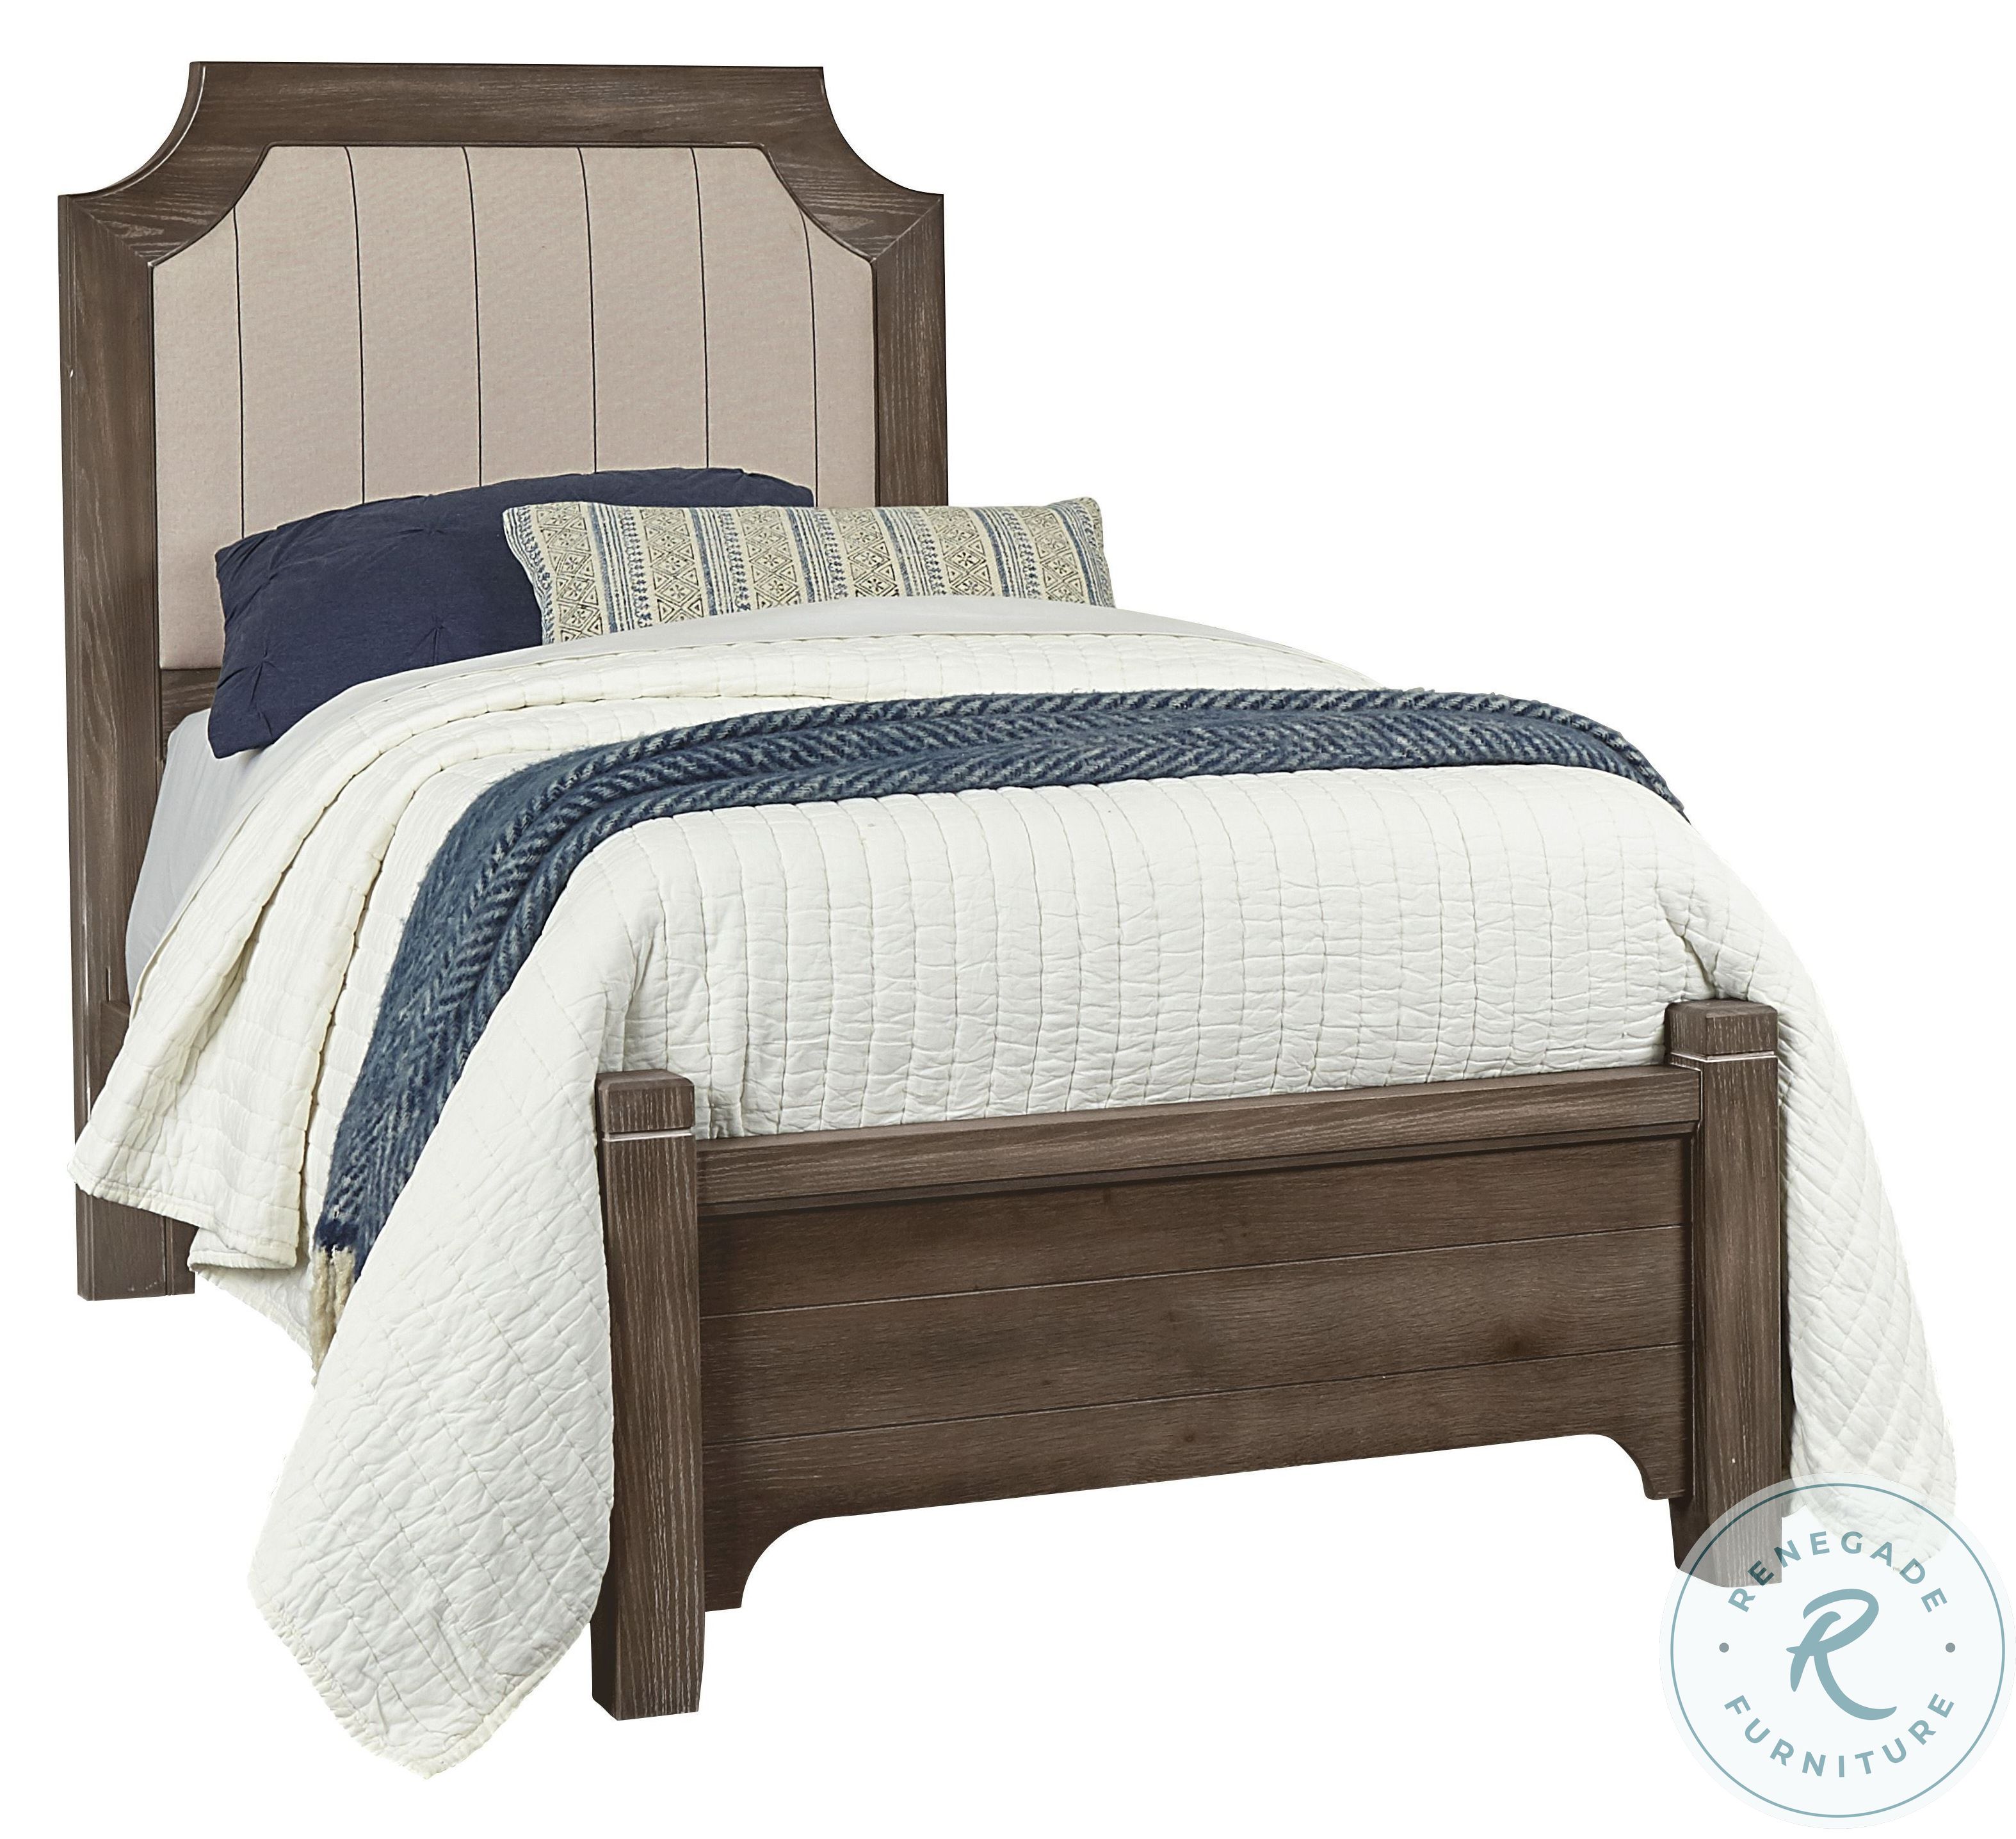 Bungalow Folkstone Upholstered Youth Panel Bedroom Set